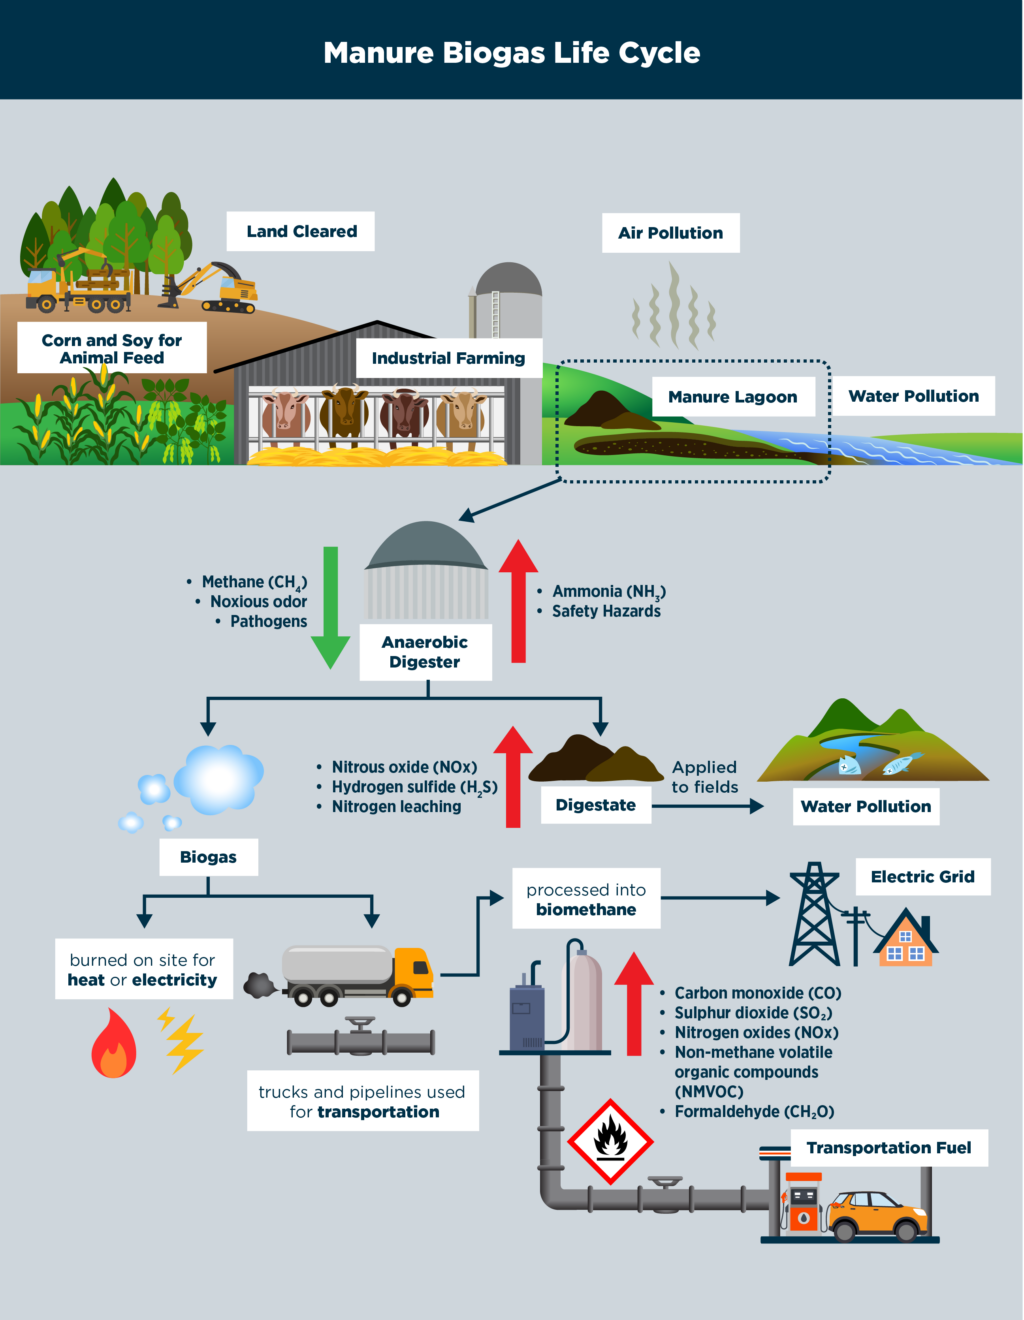 manure biogas life cycle infographic